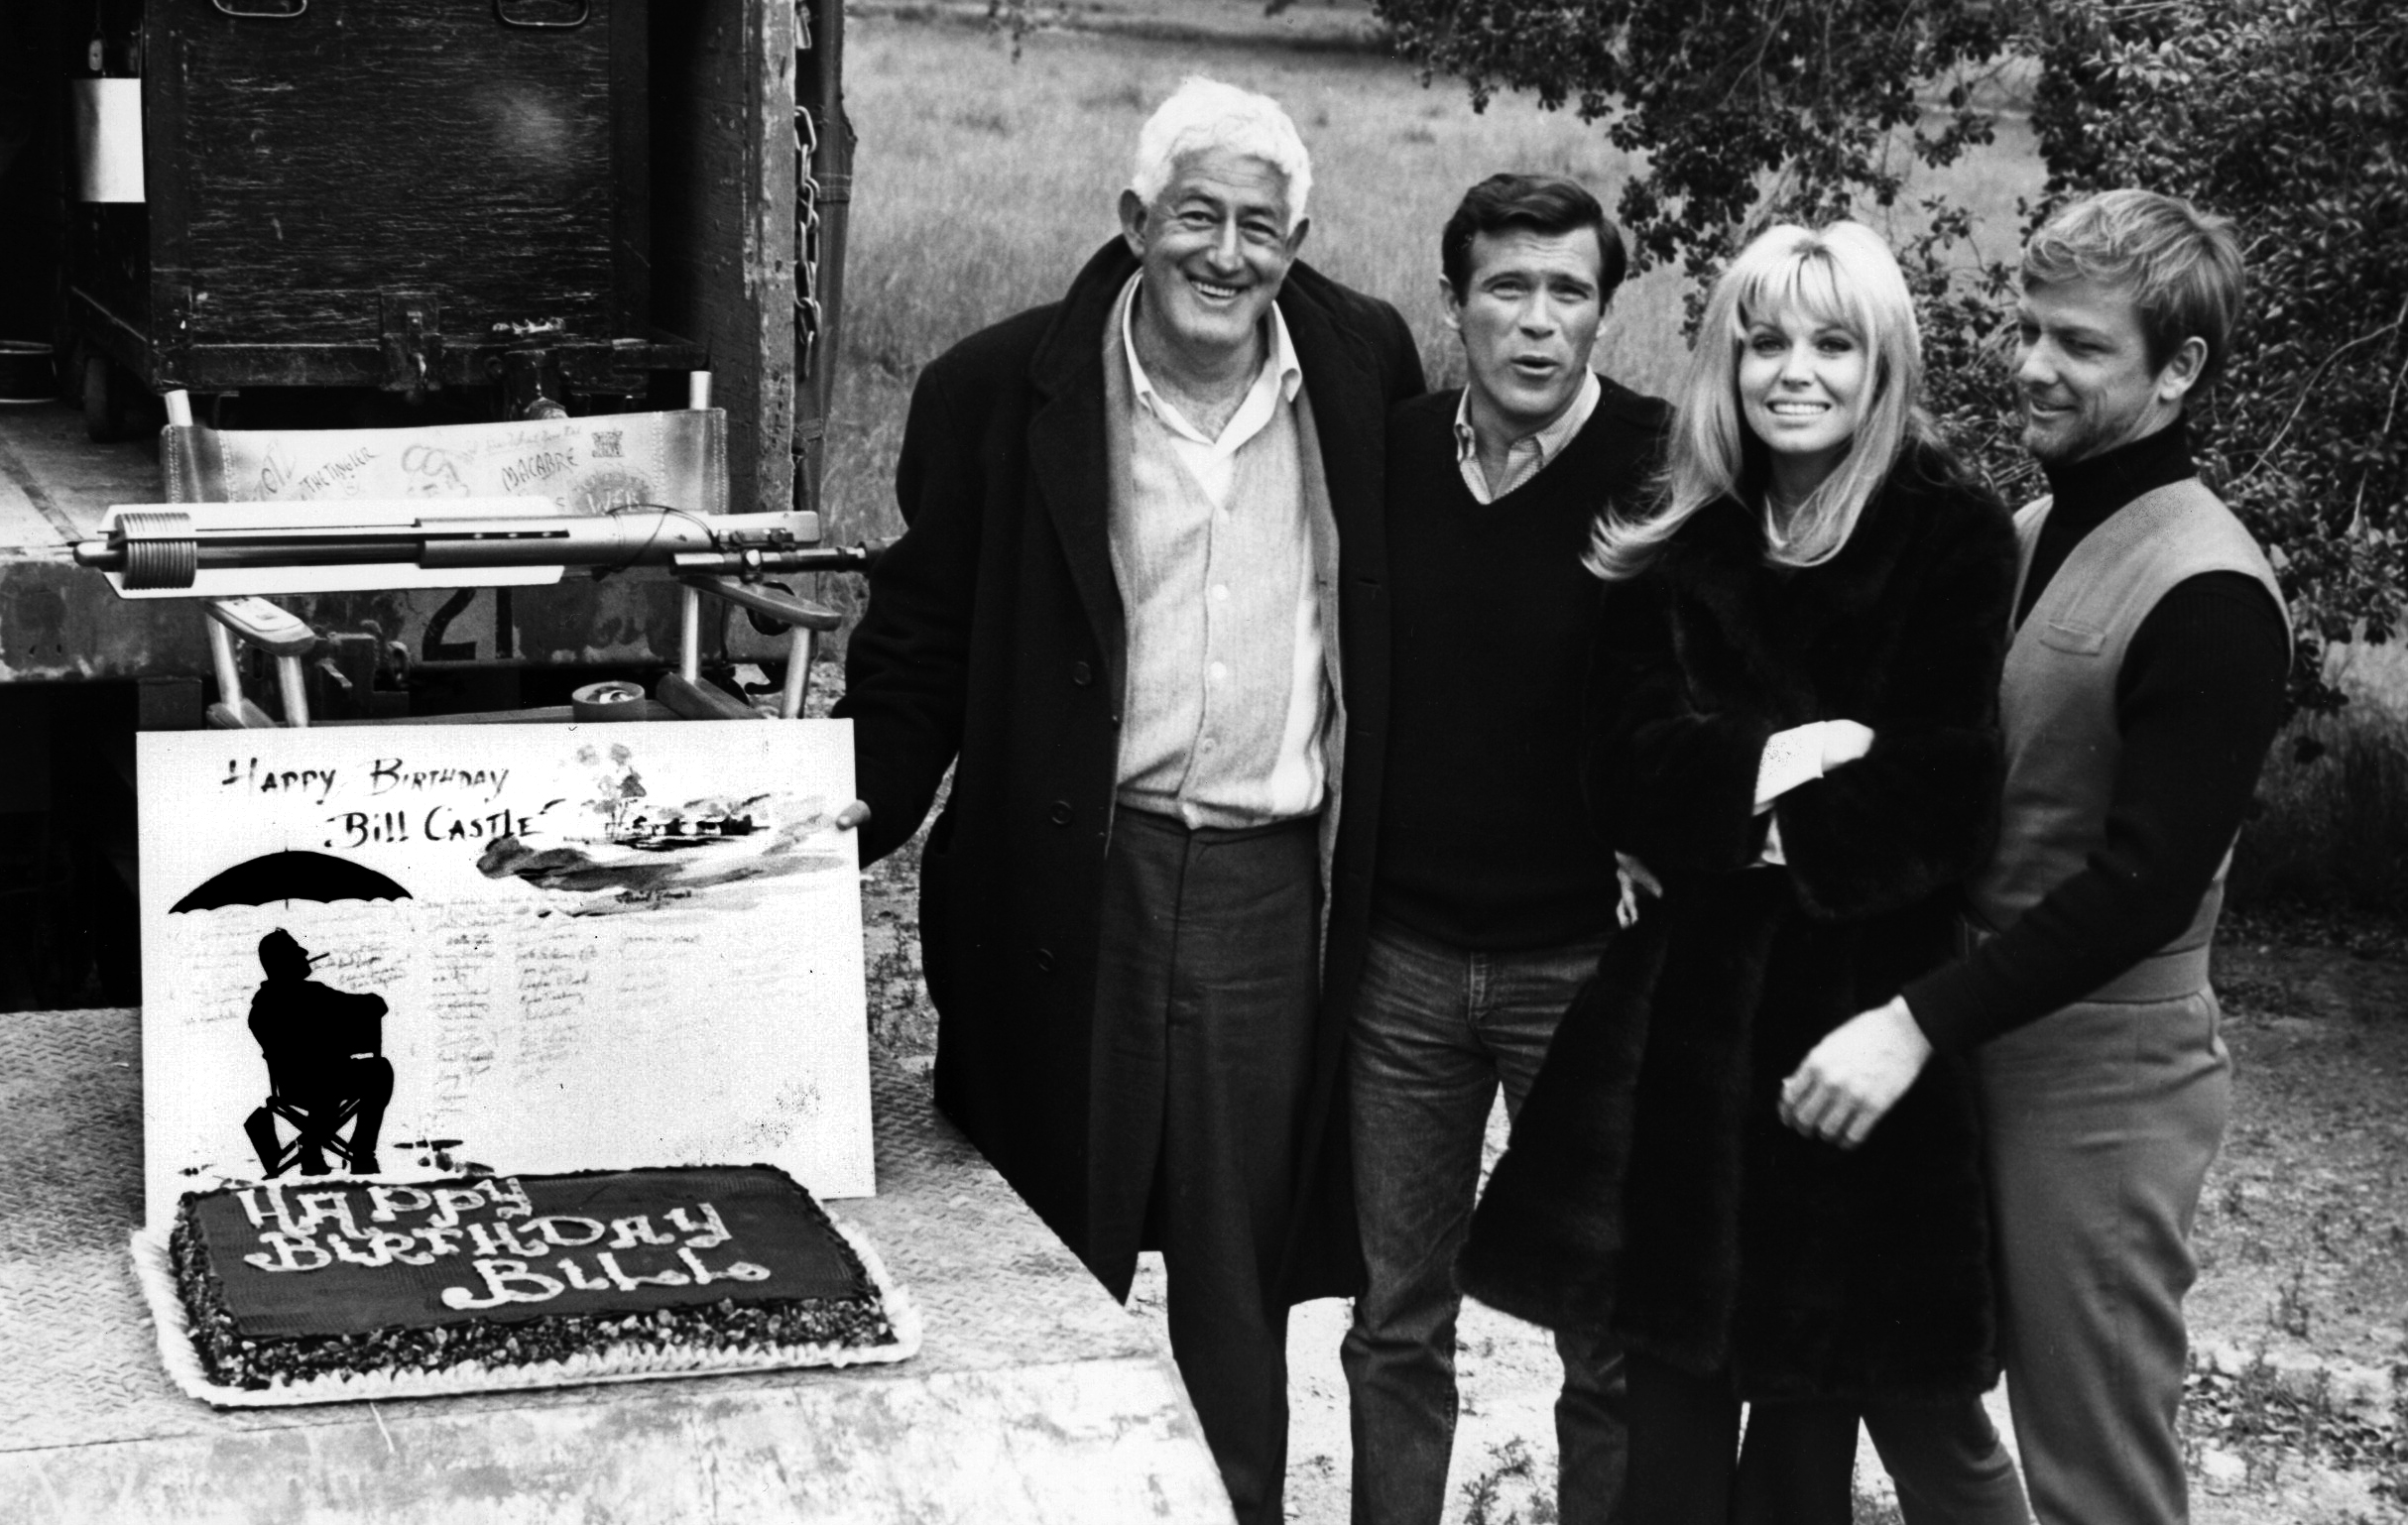 William Castle and the cast of Project X on his birthday